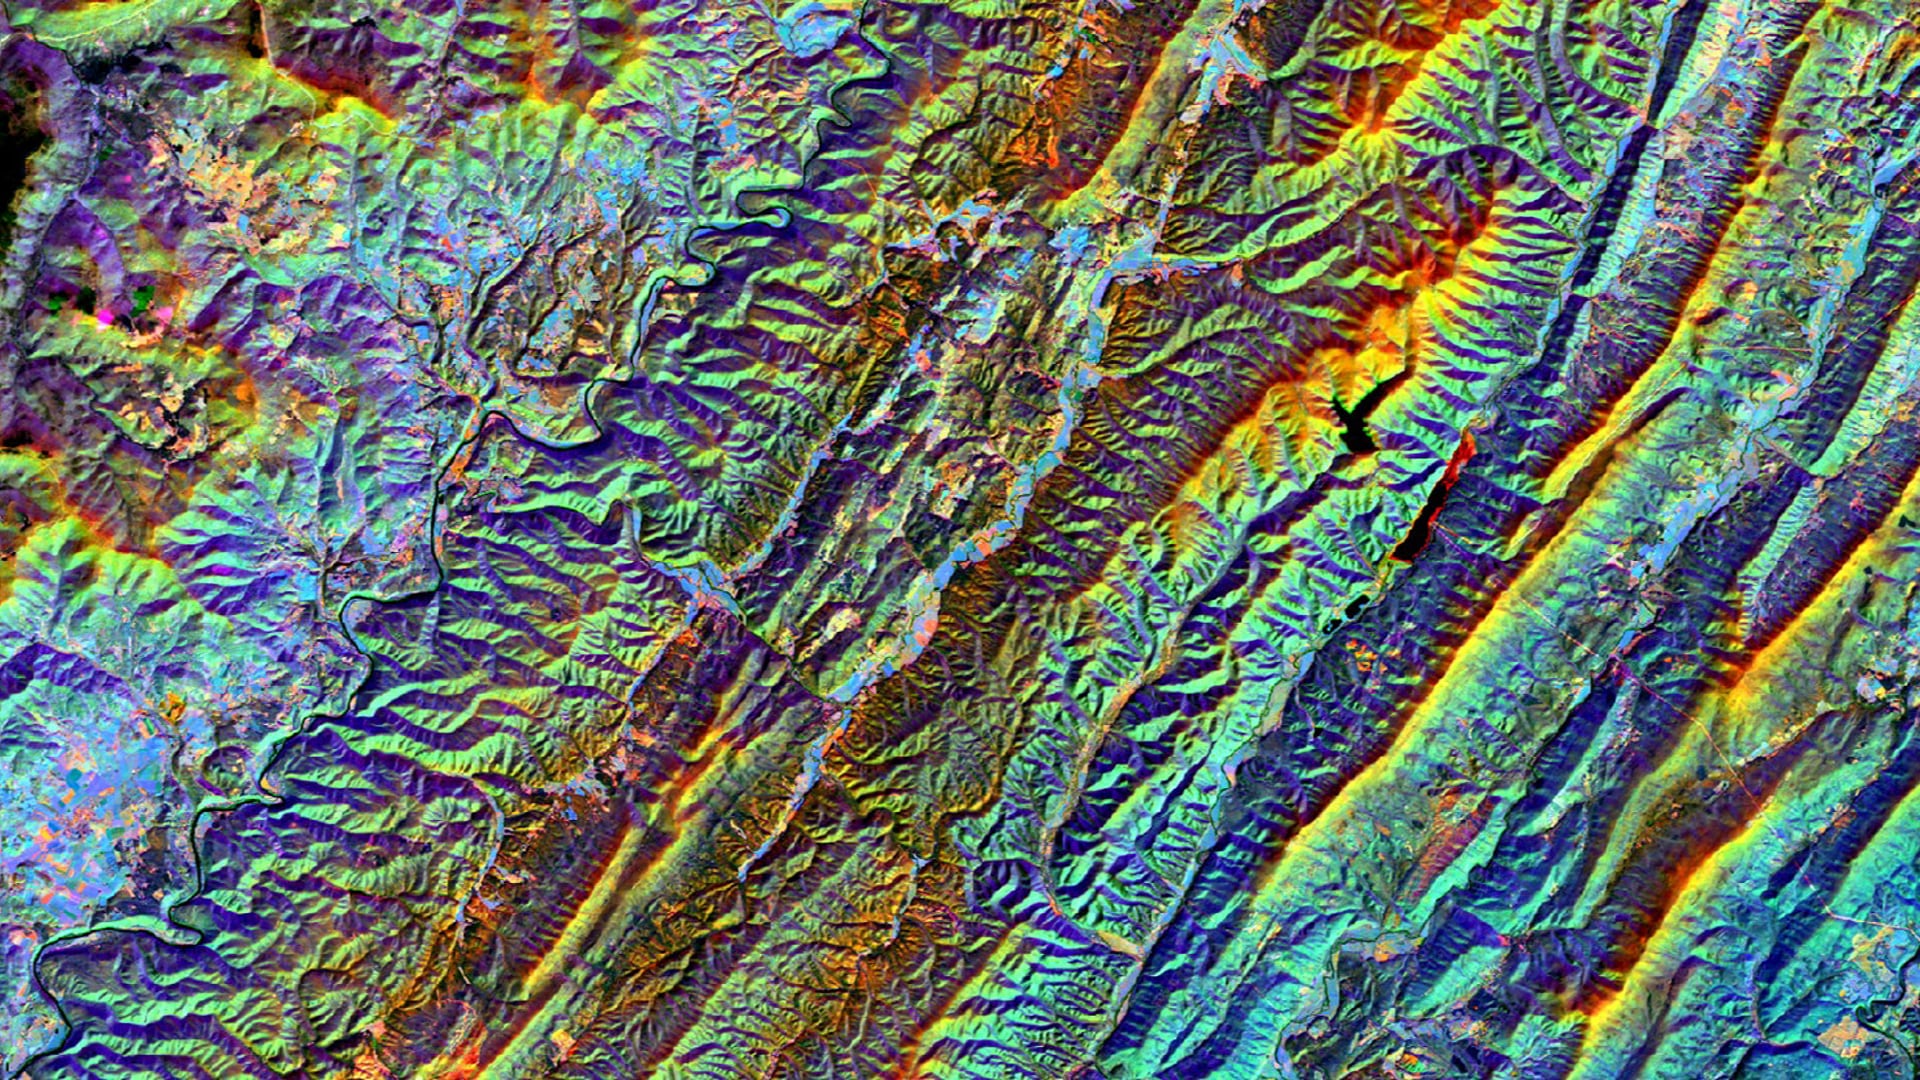 Split-season composite from May (leaf-on) and November (leaf-off) 2018 in the Allegheny Mountains of West Virginia. This Landsat 8 OLI imagery displays a color combination of SWIR_1 (leaf-on), SWIR_1 (leaf-off), and NIR (leaf-on). Urban areas are shown in pink, impervious surfaces in periwinkle, conifer forests in dark green, and exposed soil in orange. This stack, and others like it, are used for determining land cover classifications and collecting training data for forest restoration efforts.